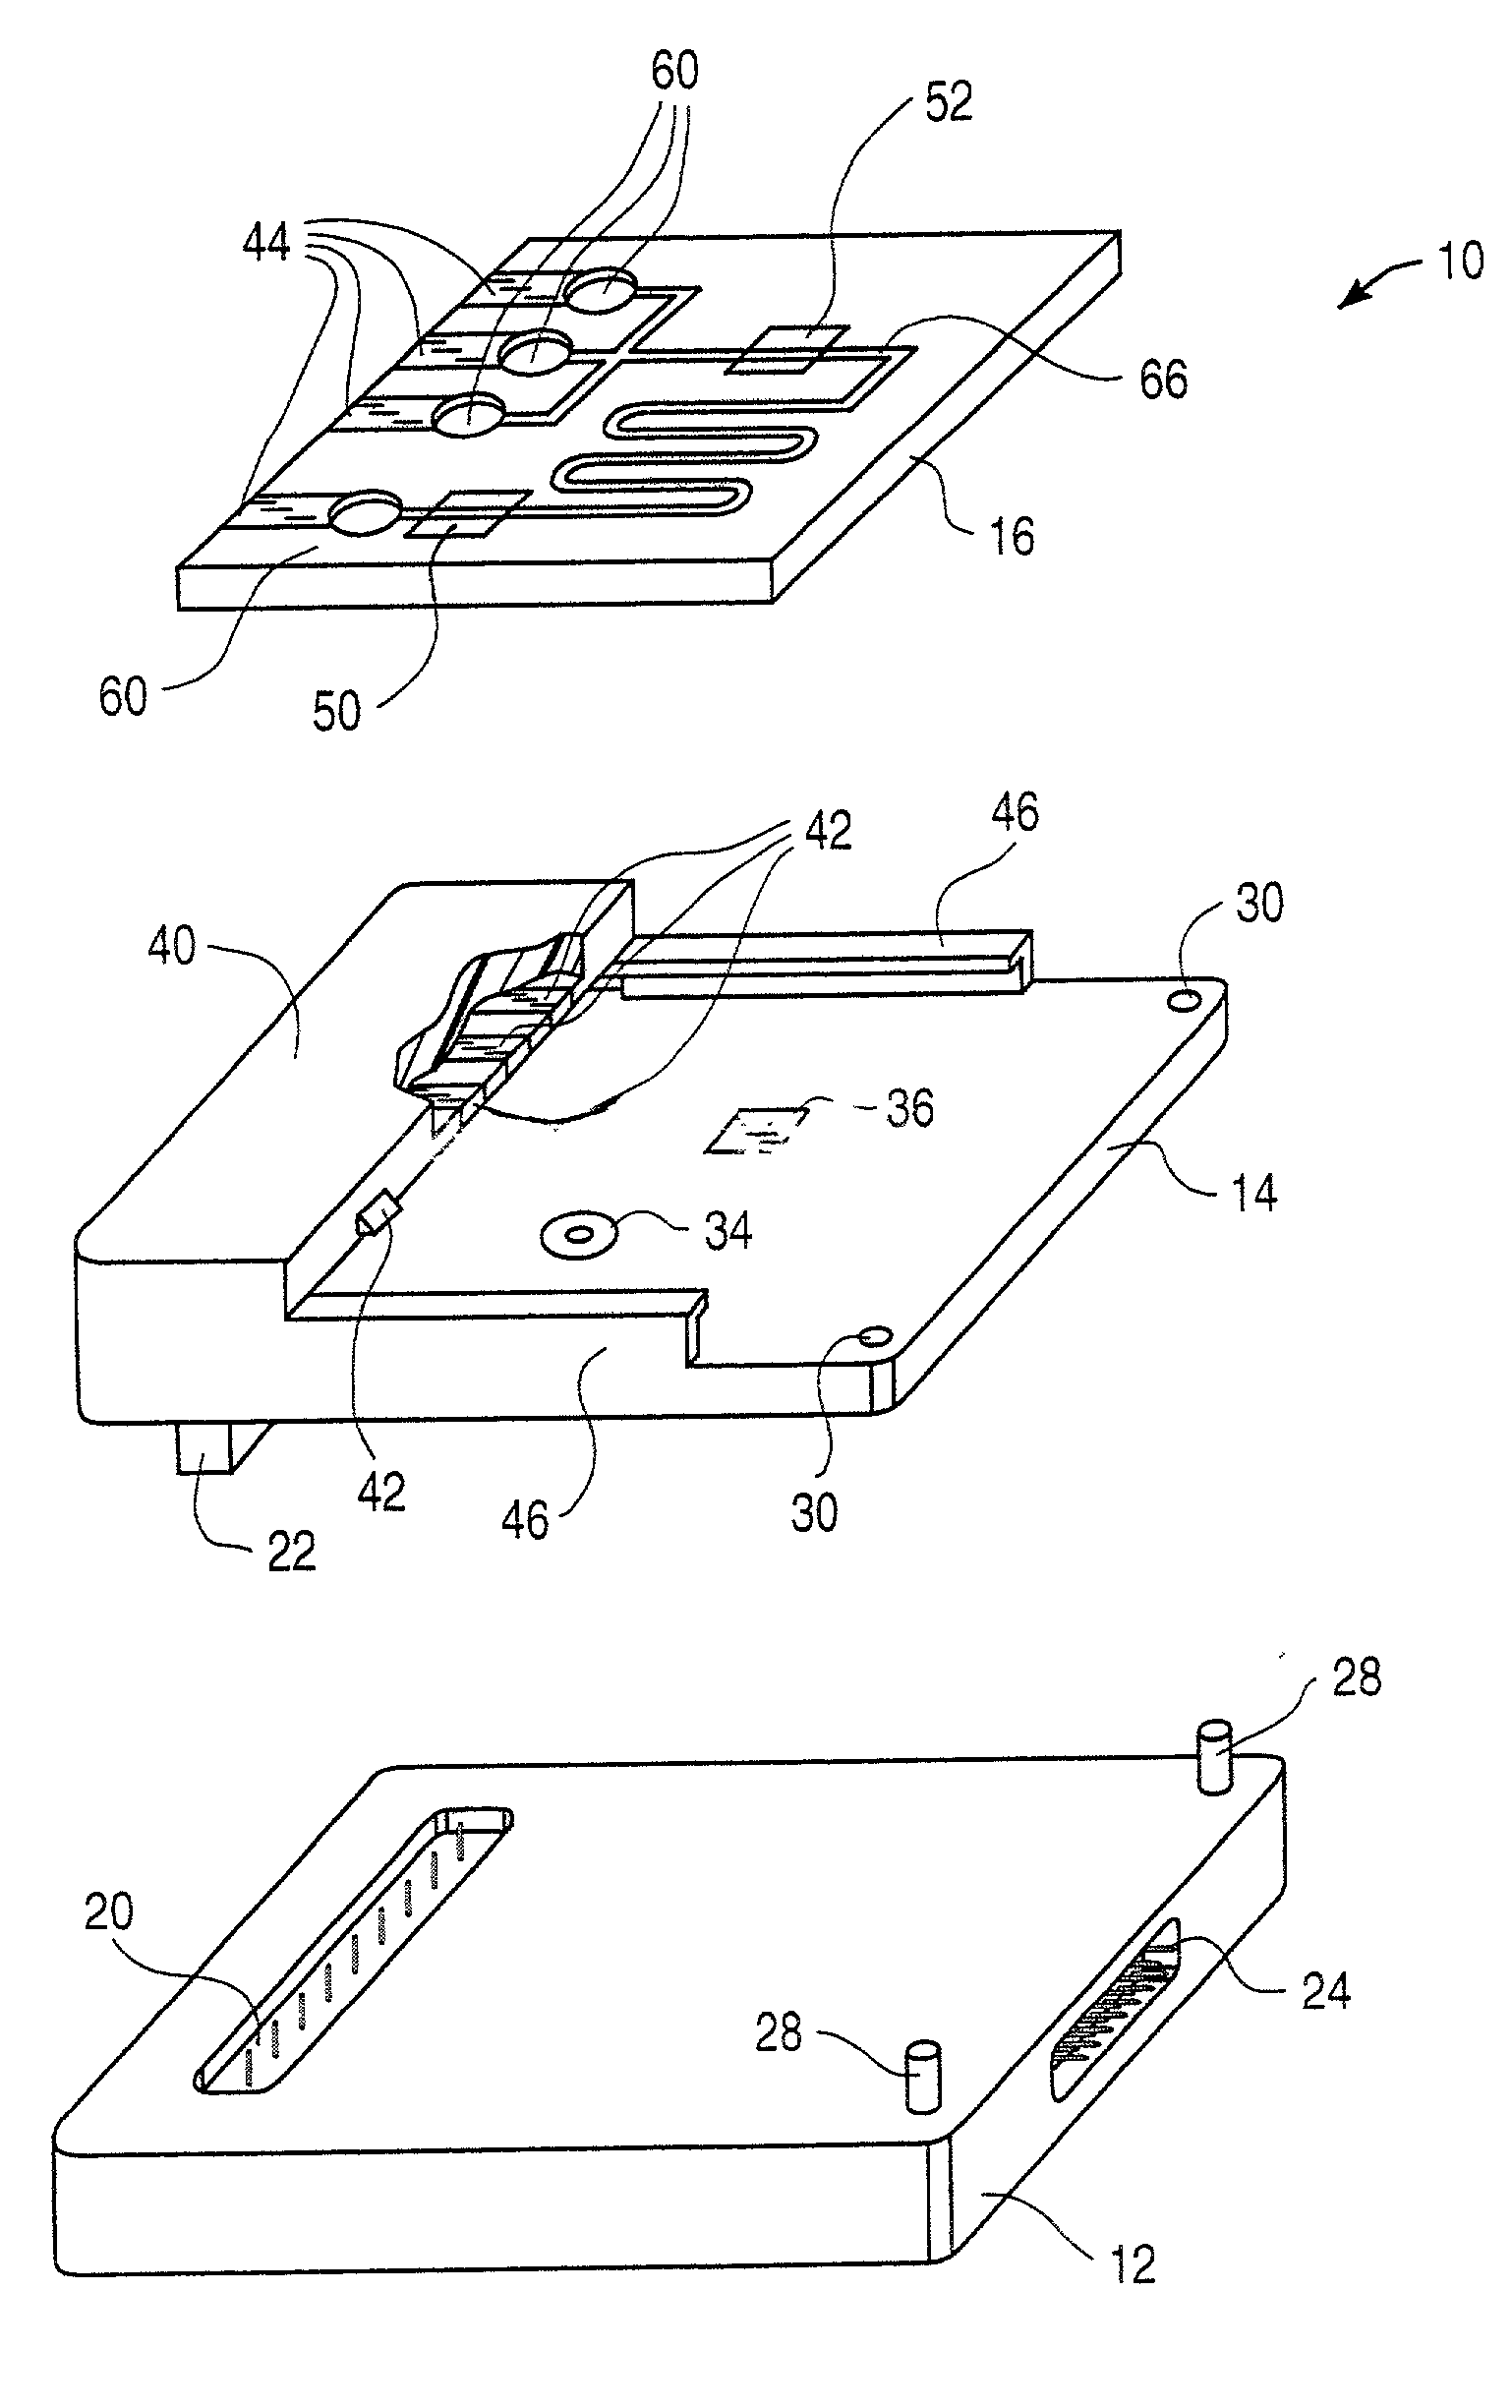 Analytical system and method